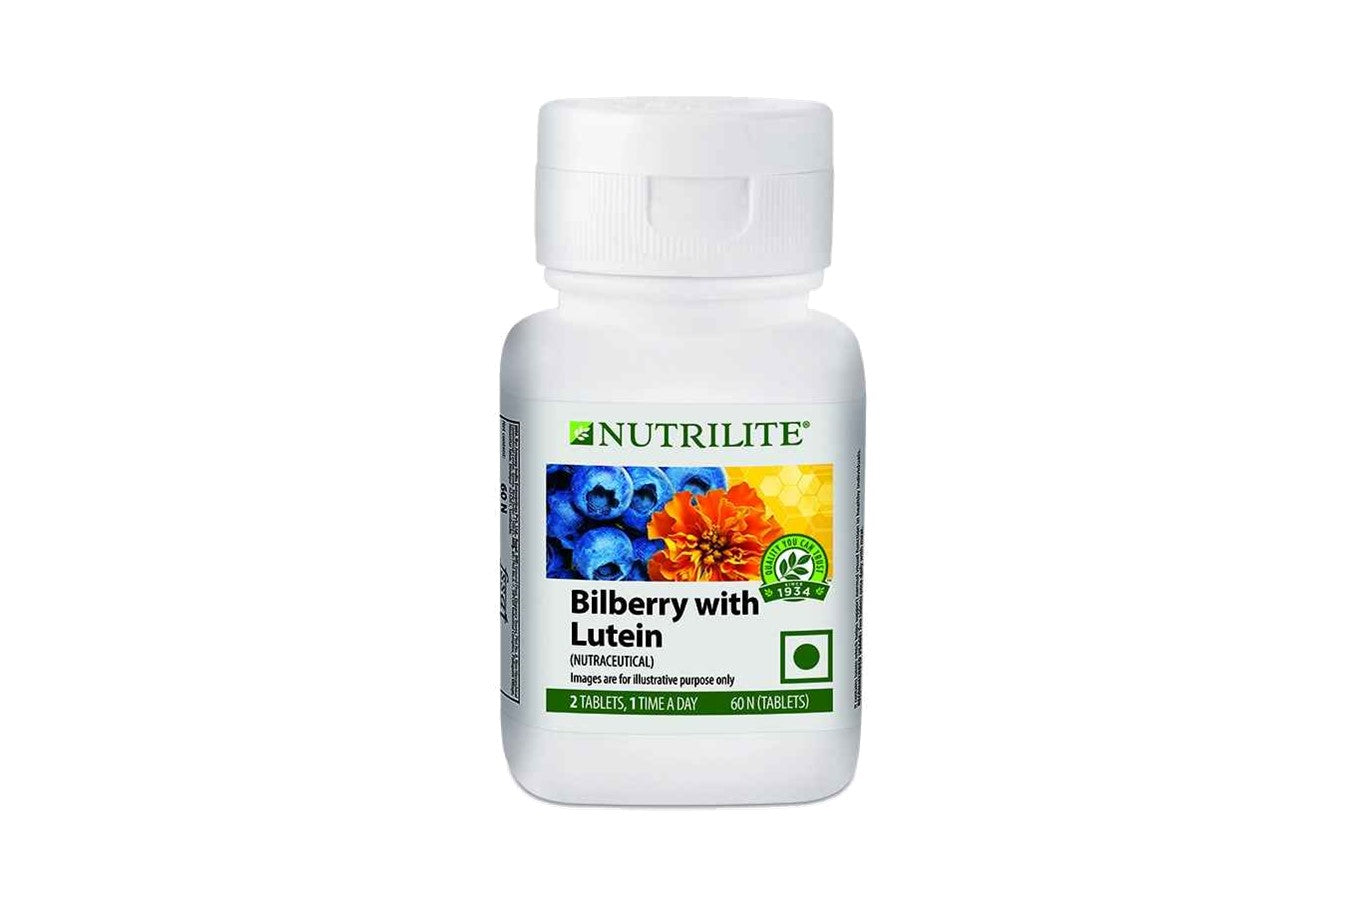 Nutrilite Bilberry with Lutein 60N